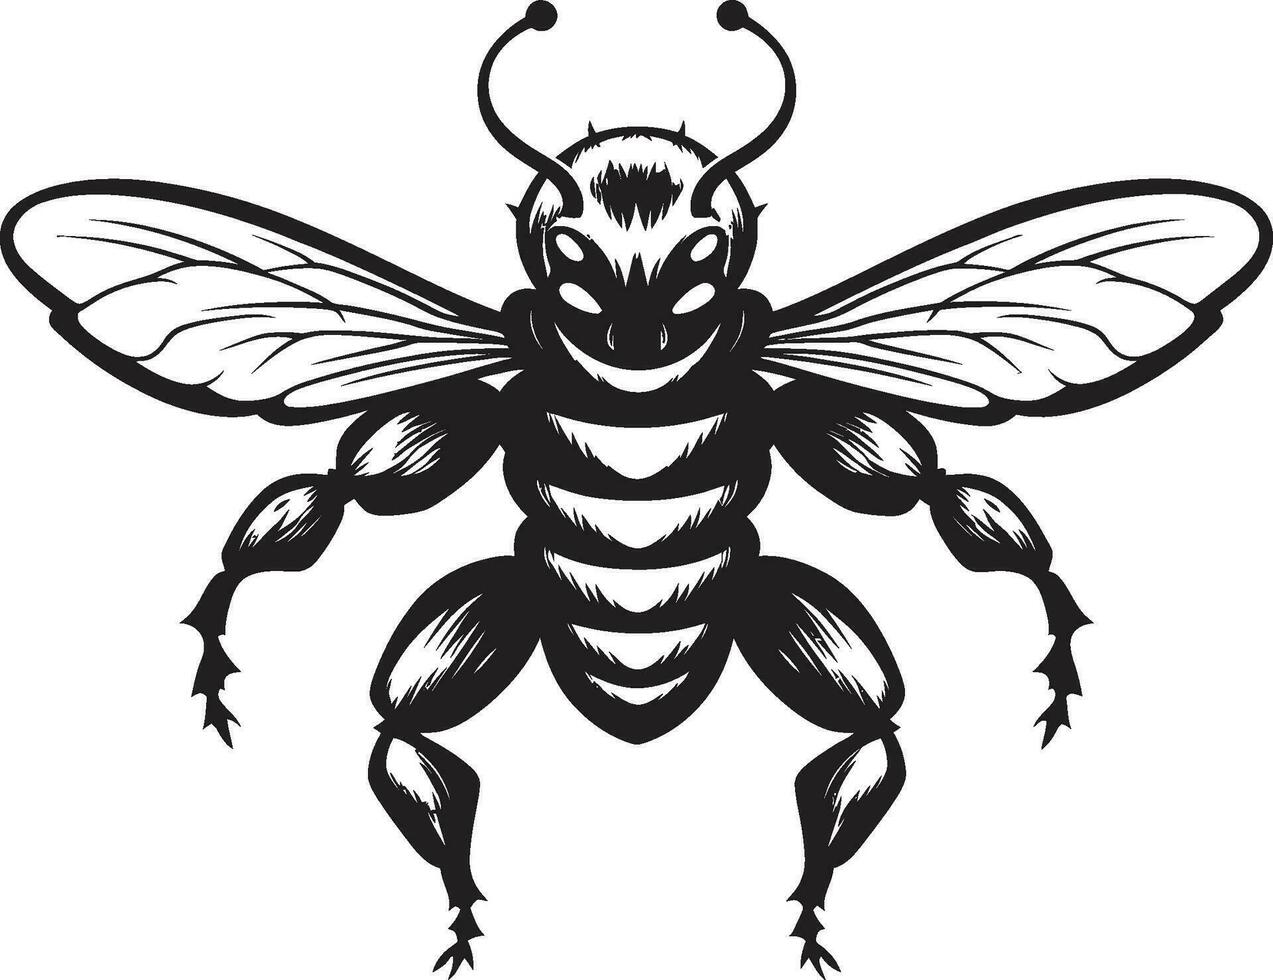 Minimalistic Hive Majesty Monochrome Symbol Emblematic Insect Excellence Mighty Art vector